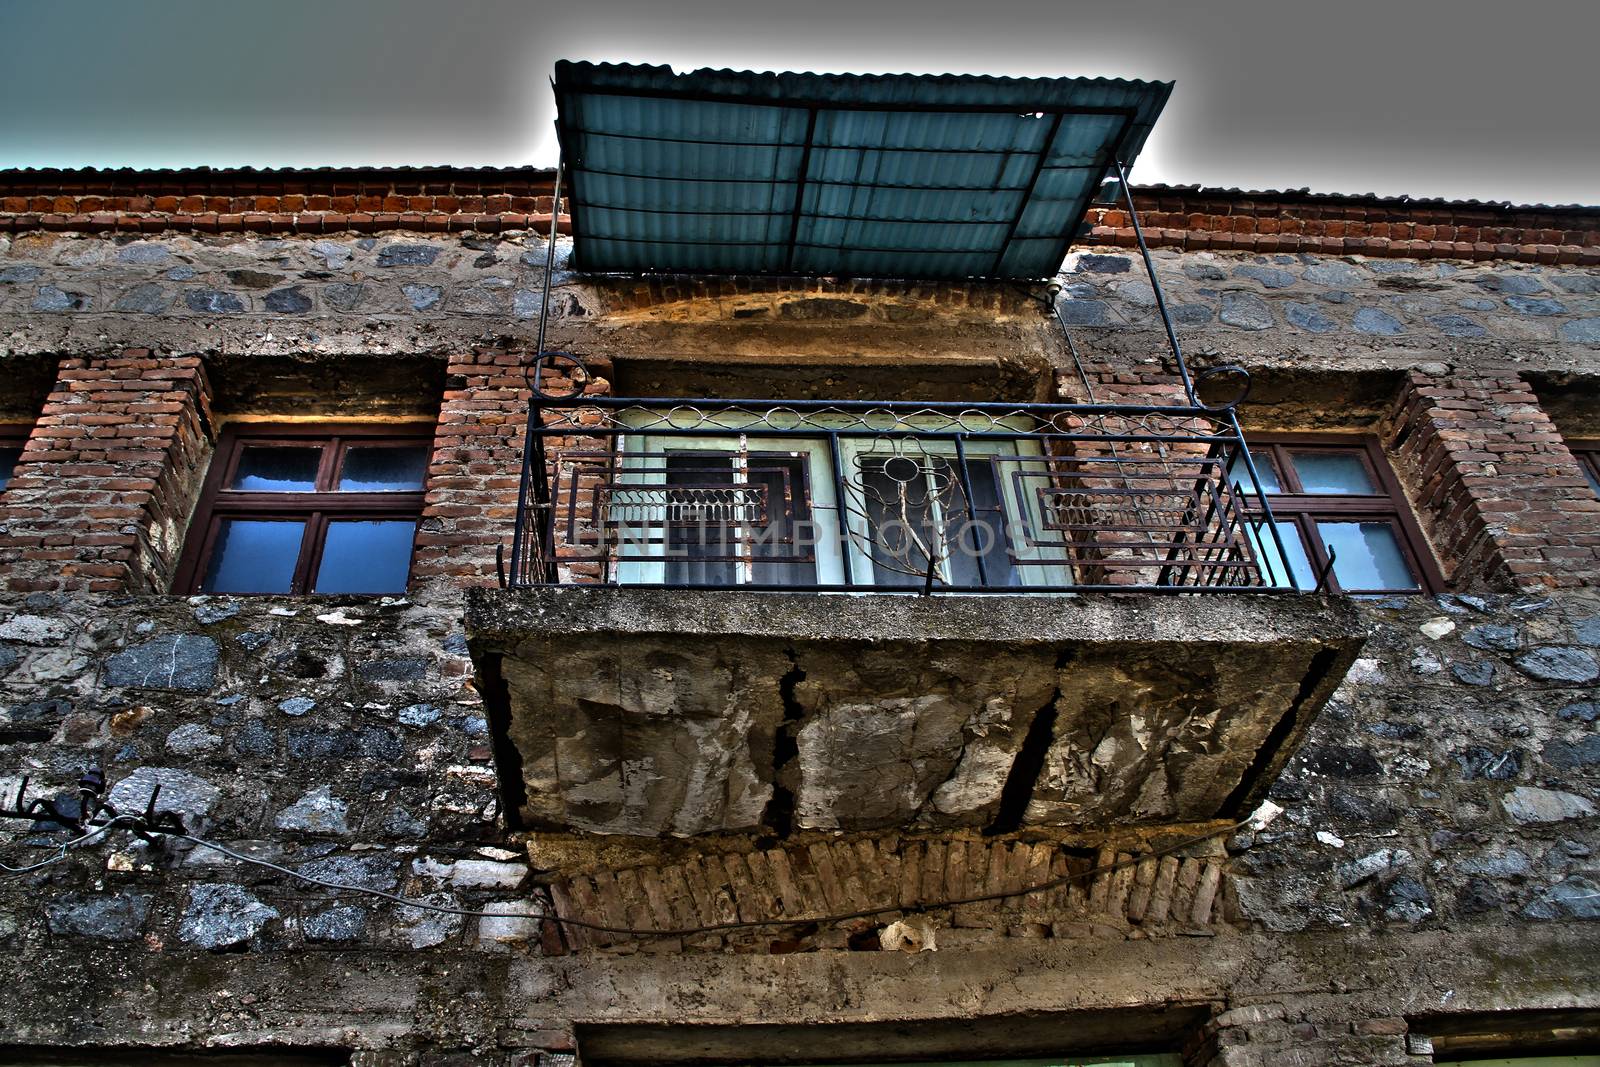 old house in the village